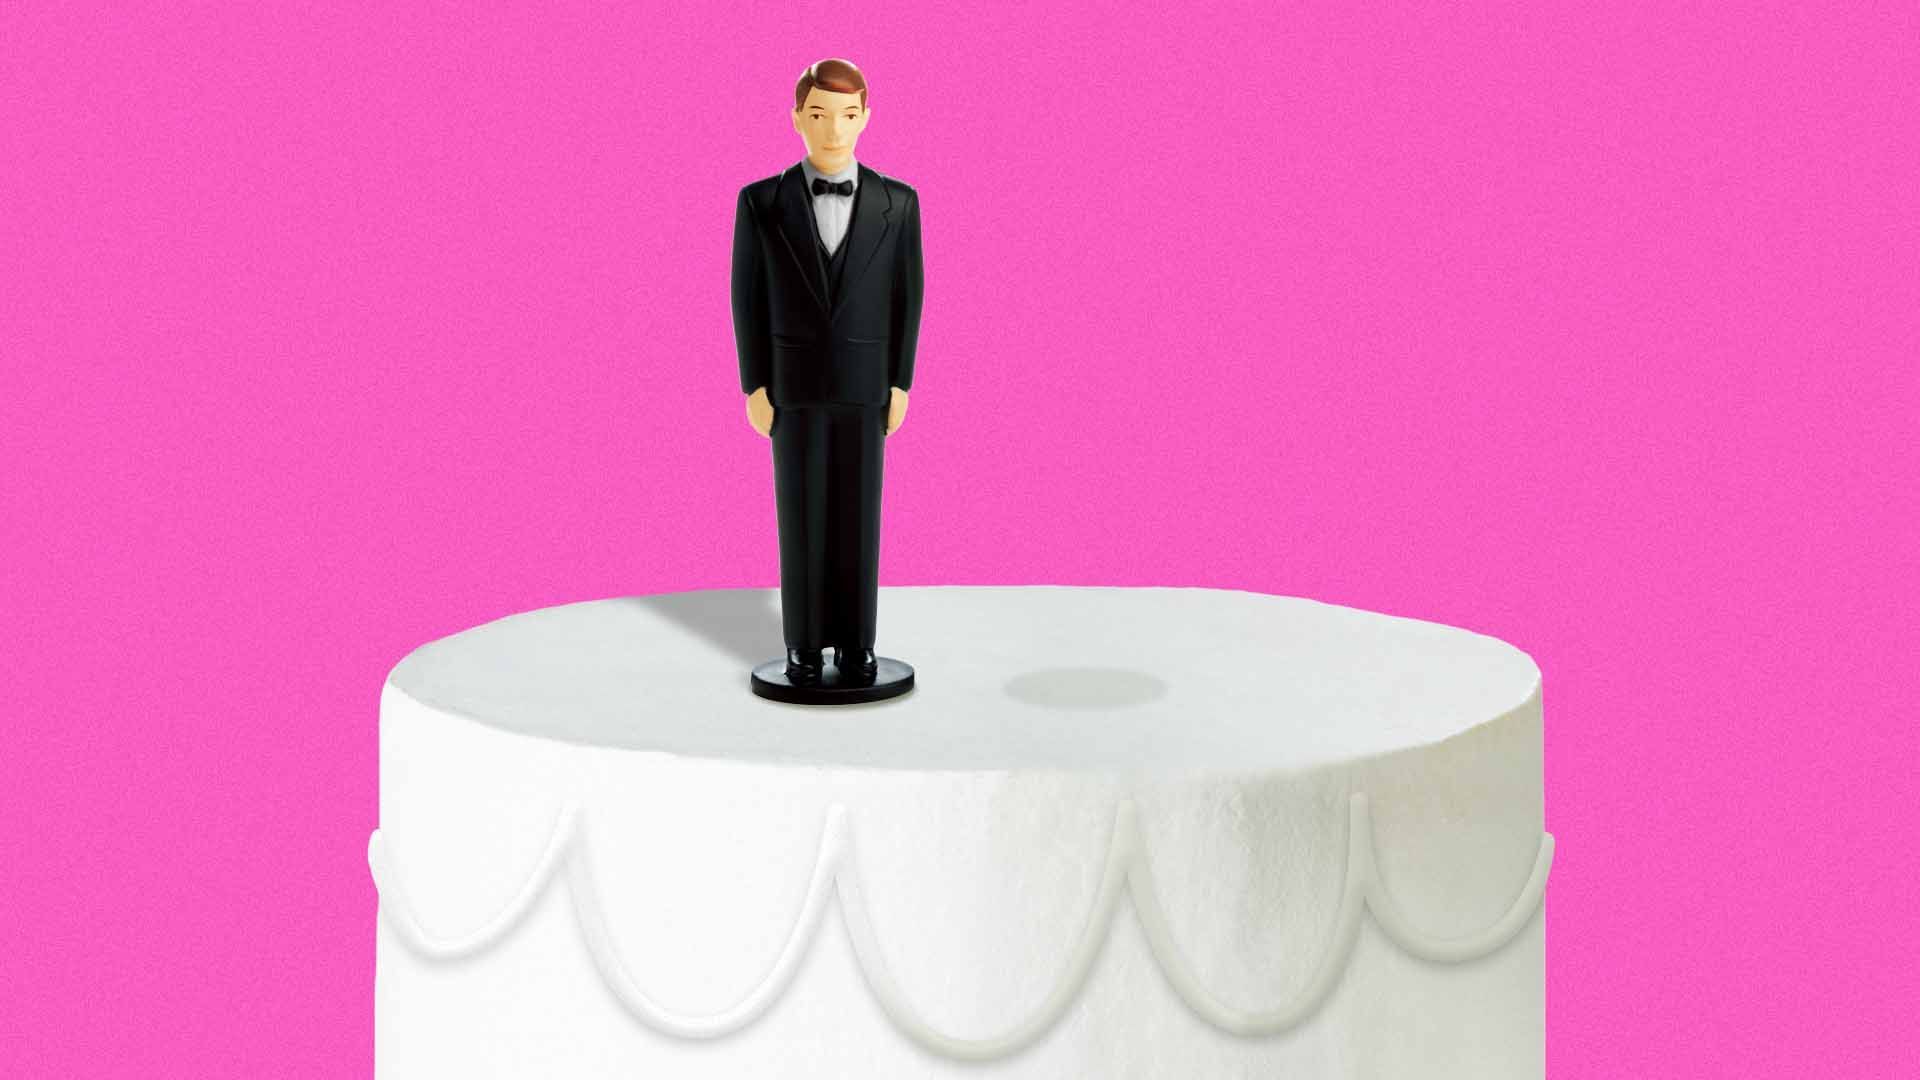 Illustration of a lone groom cake topper atop a wedding cake